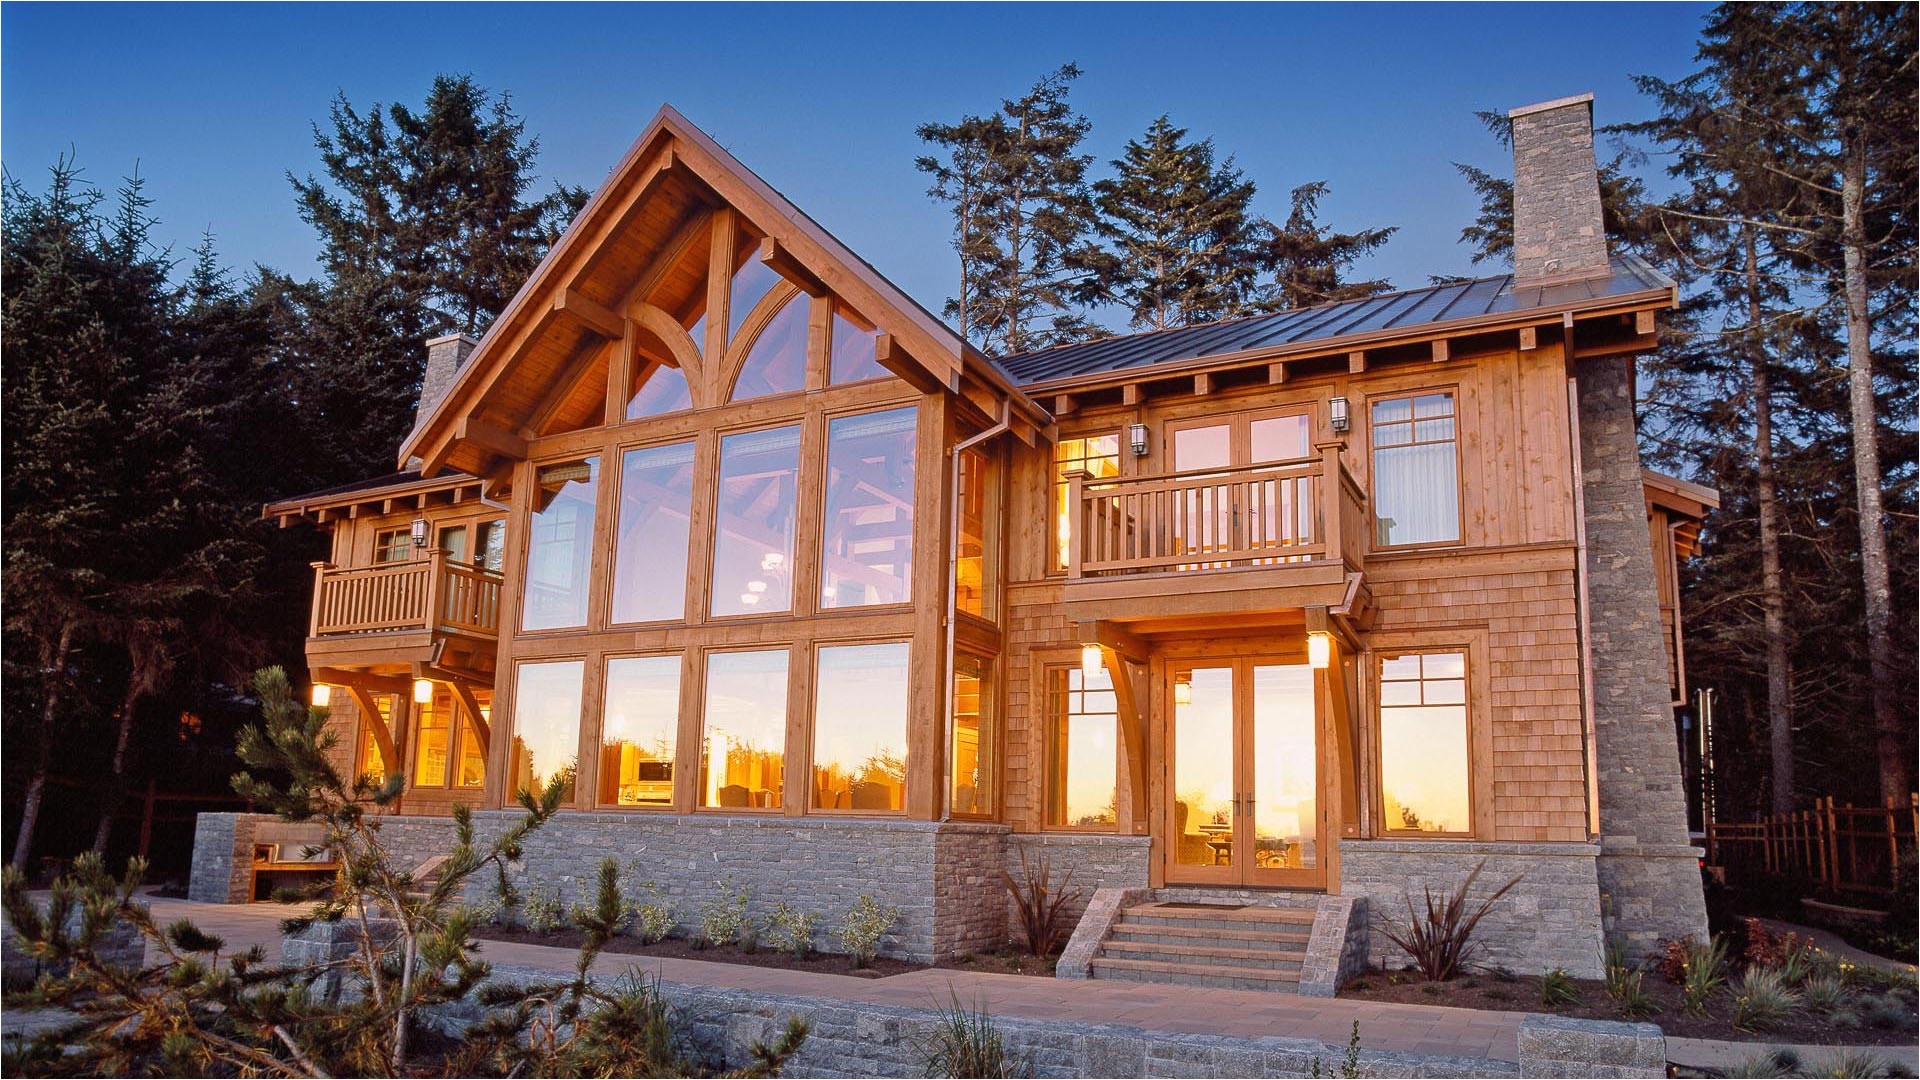 Canadian Timber Frame Home Plans Canadian Timber Frame House Plans